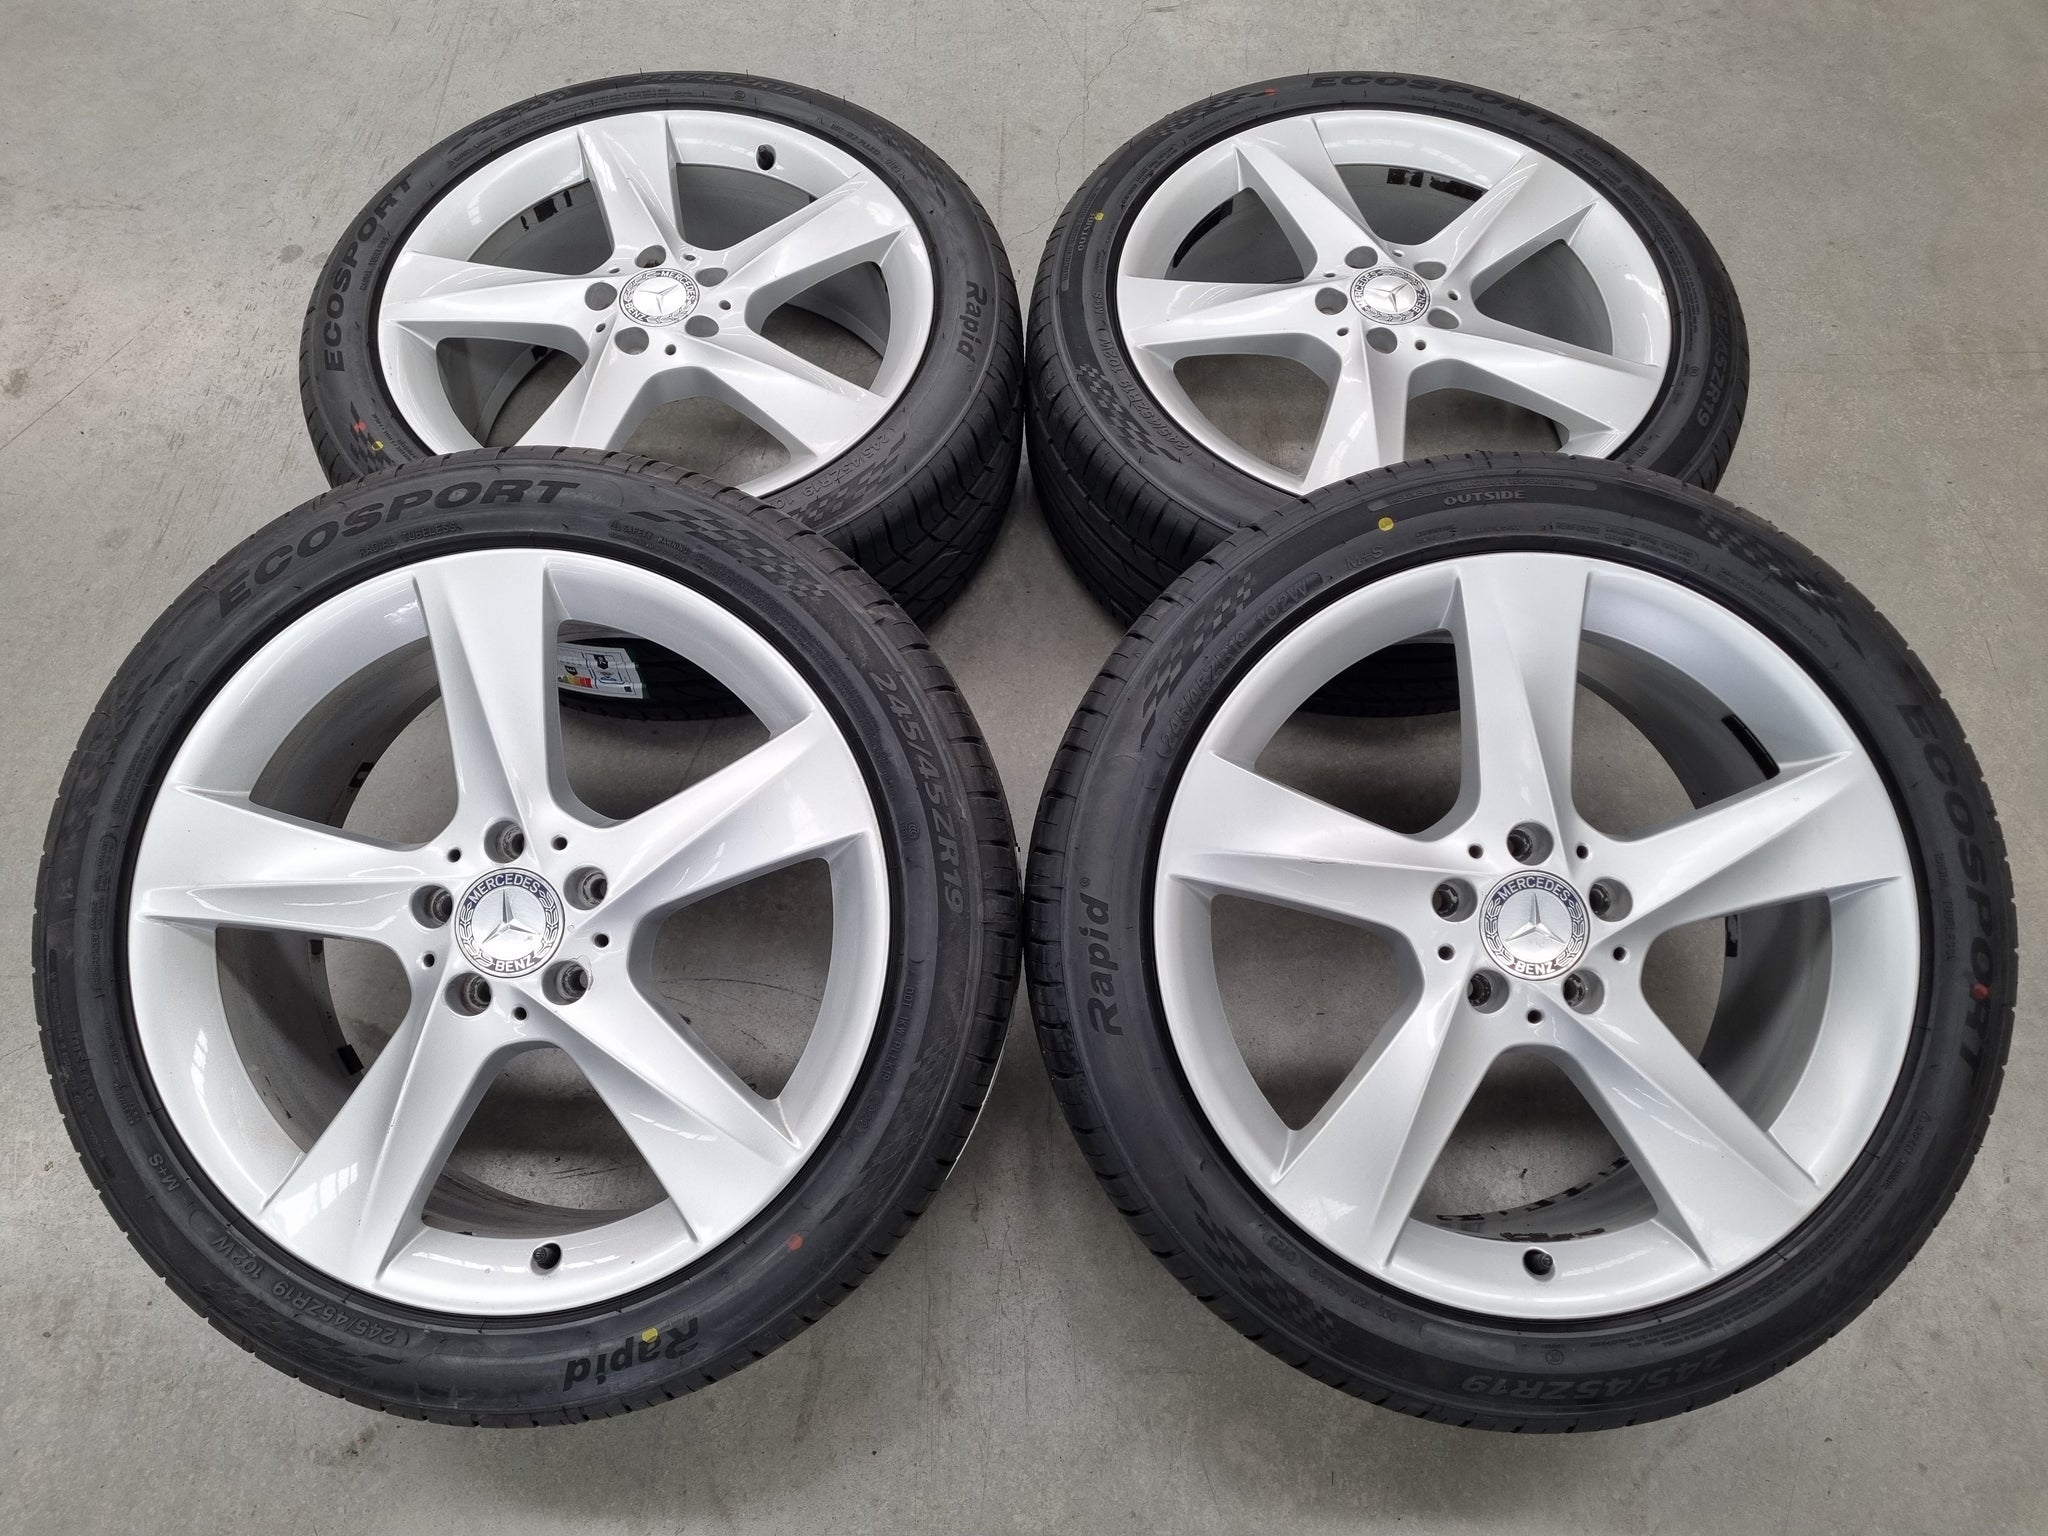 Load image into Gallery viewer, Genuine Mercedes Benz V-Class Viano Vito 19 Inch Wheels and Tyres Set of 4
